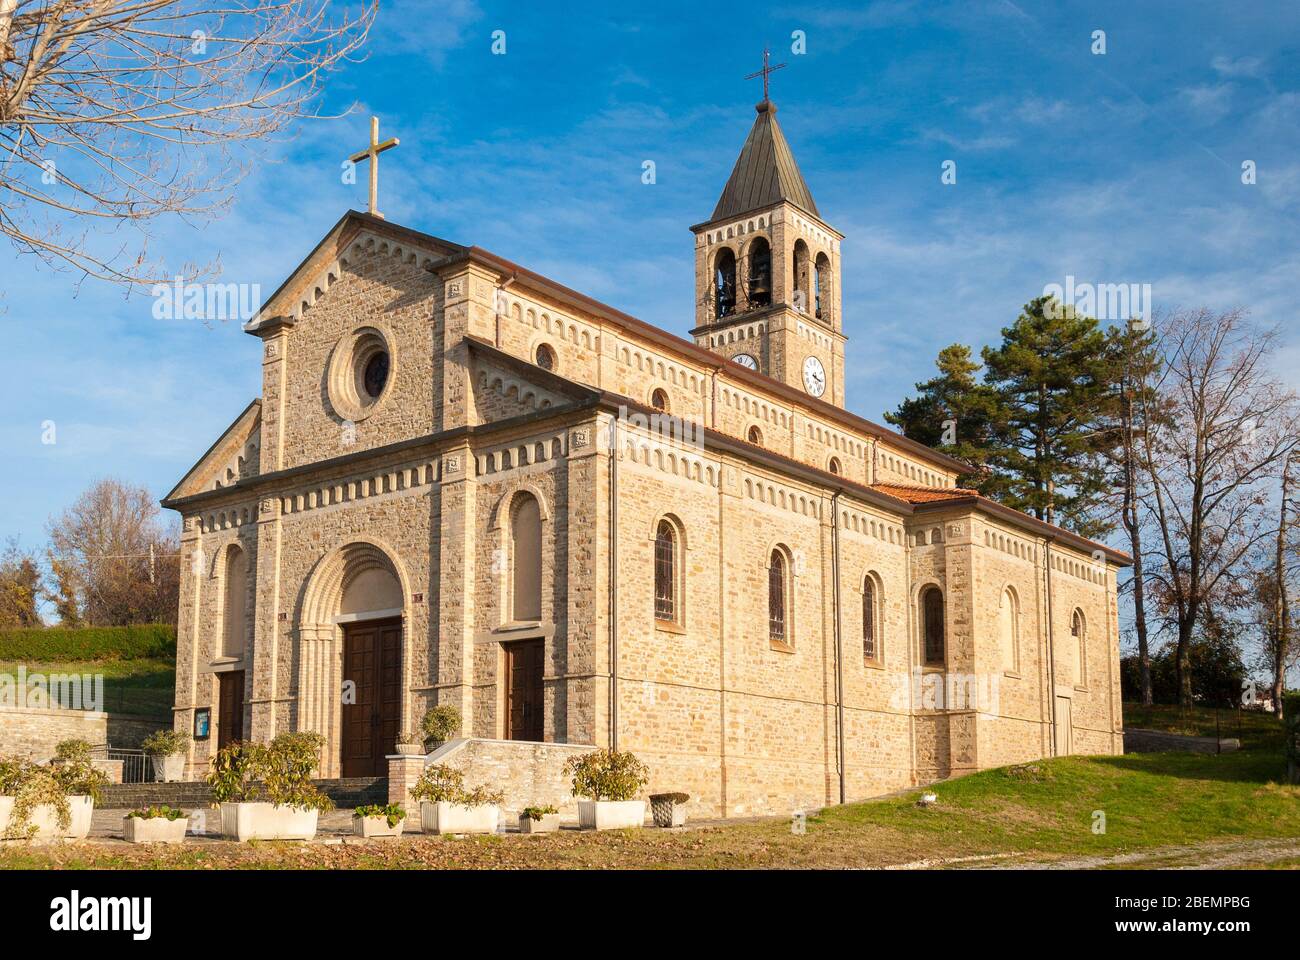 The sanctuary of Nostra Signora di Montelungo, an historic church in the Oltrepo Pavese (Lombardy, Italy) Stock Photo